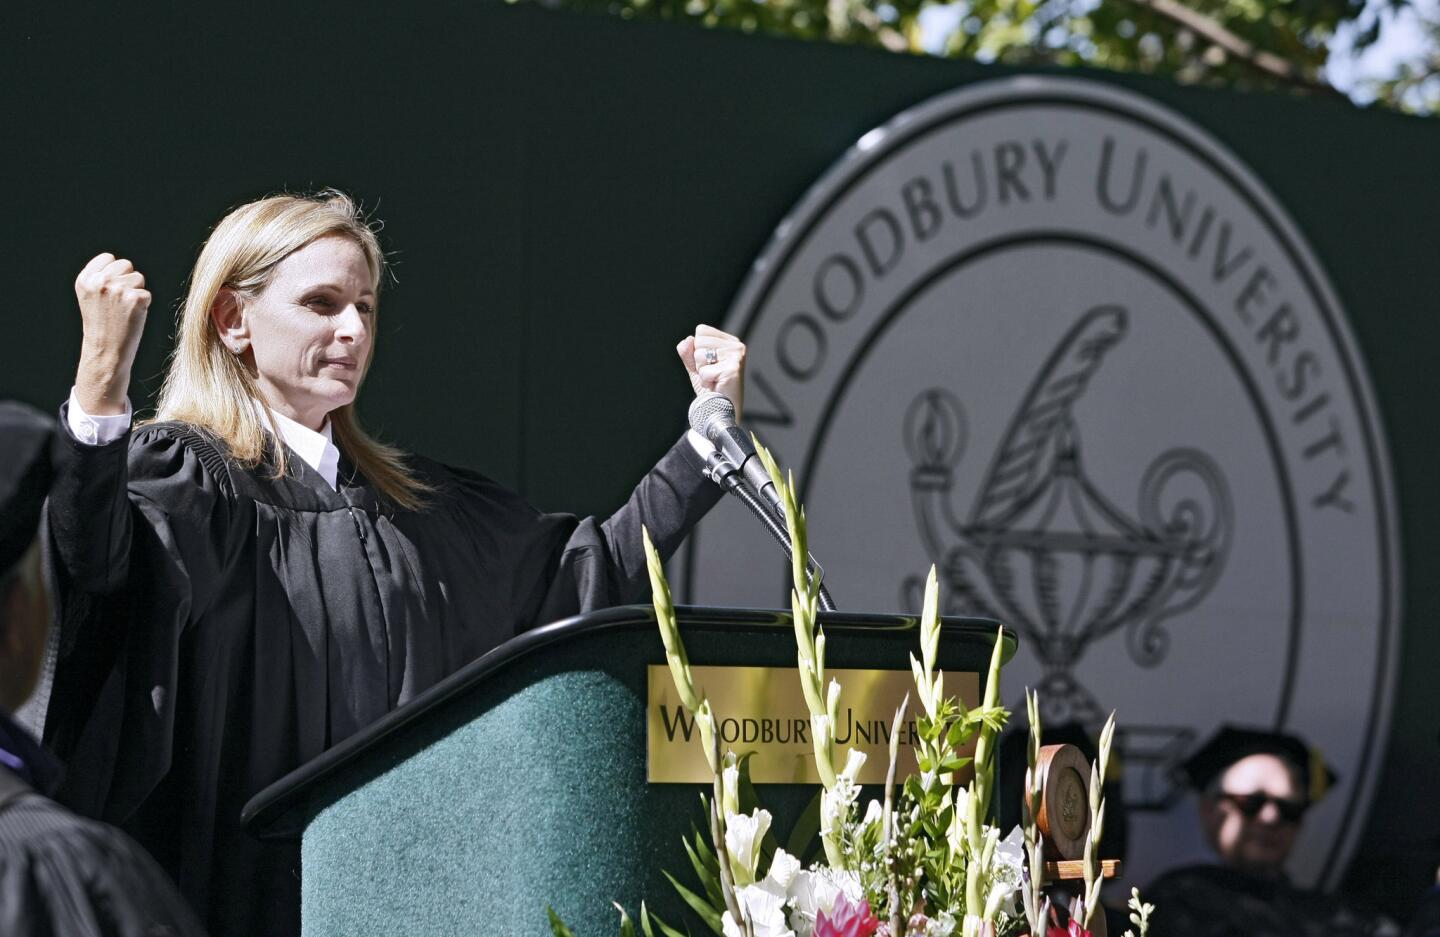 Actor, director and humanitarian Marlee Matlin gives the commencement address to the graduating class at this year's Woodbury University commencement in Burbank on Saturday, May 10, 2014.